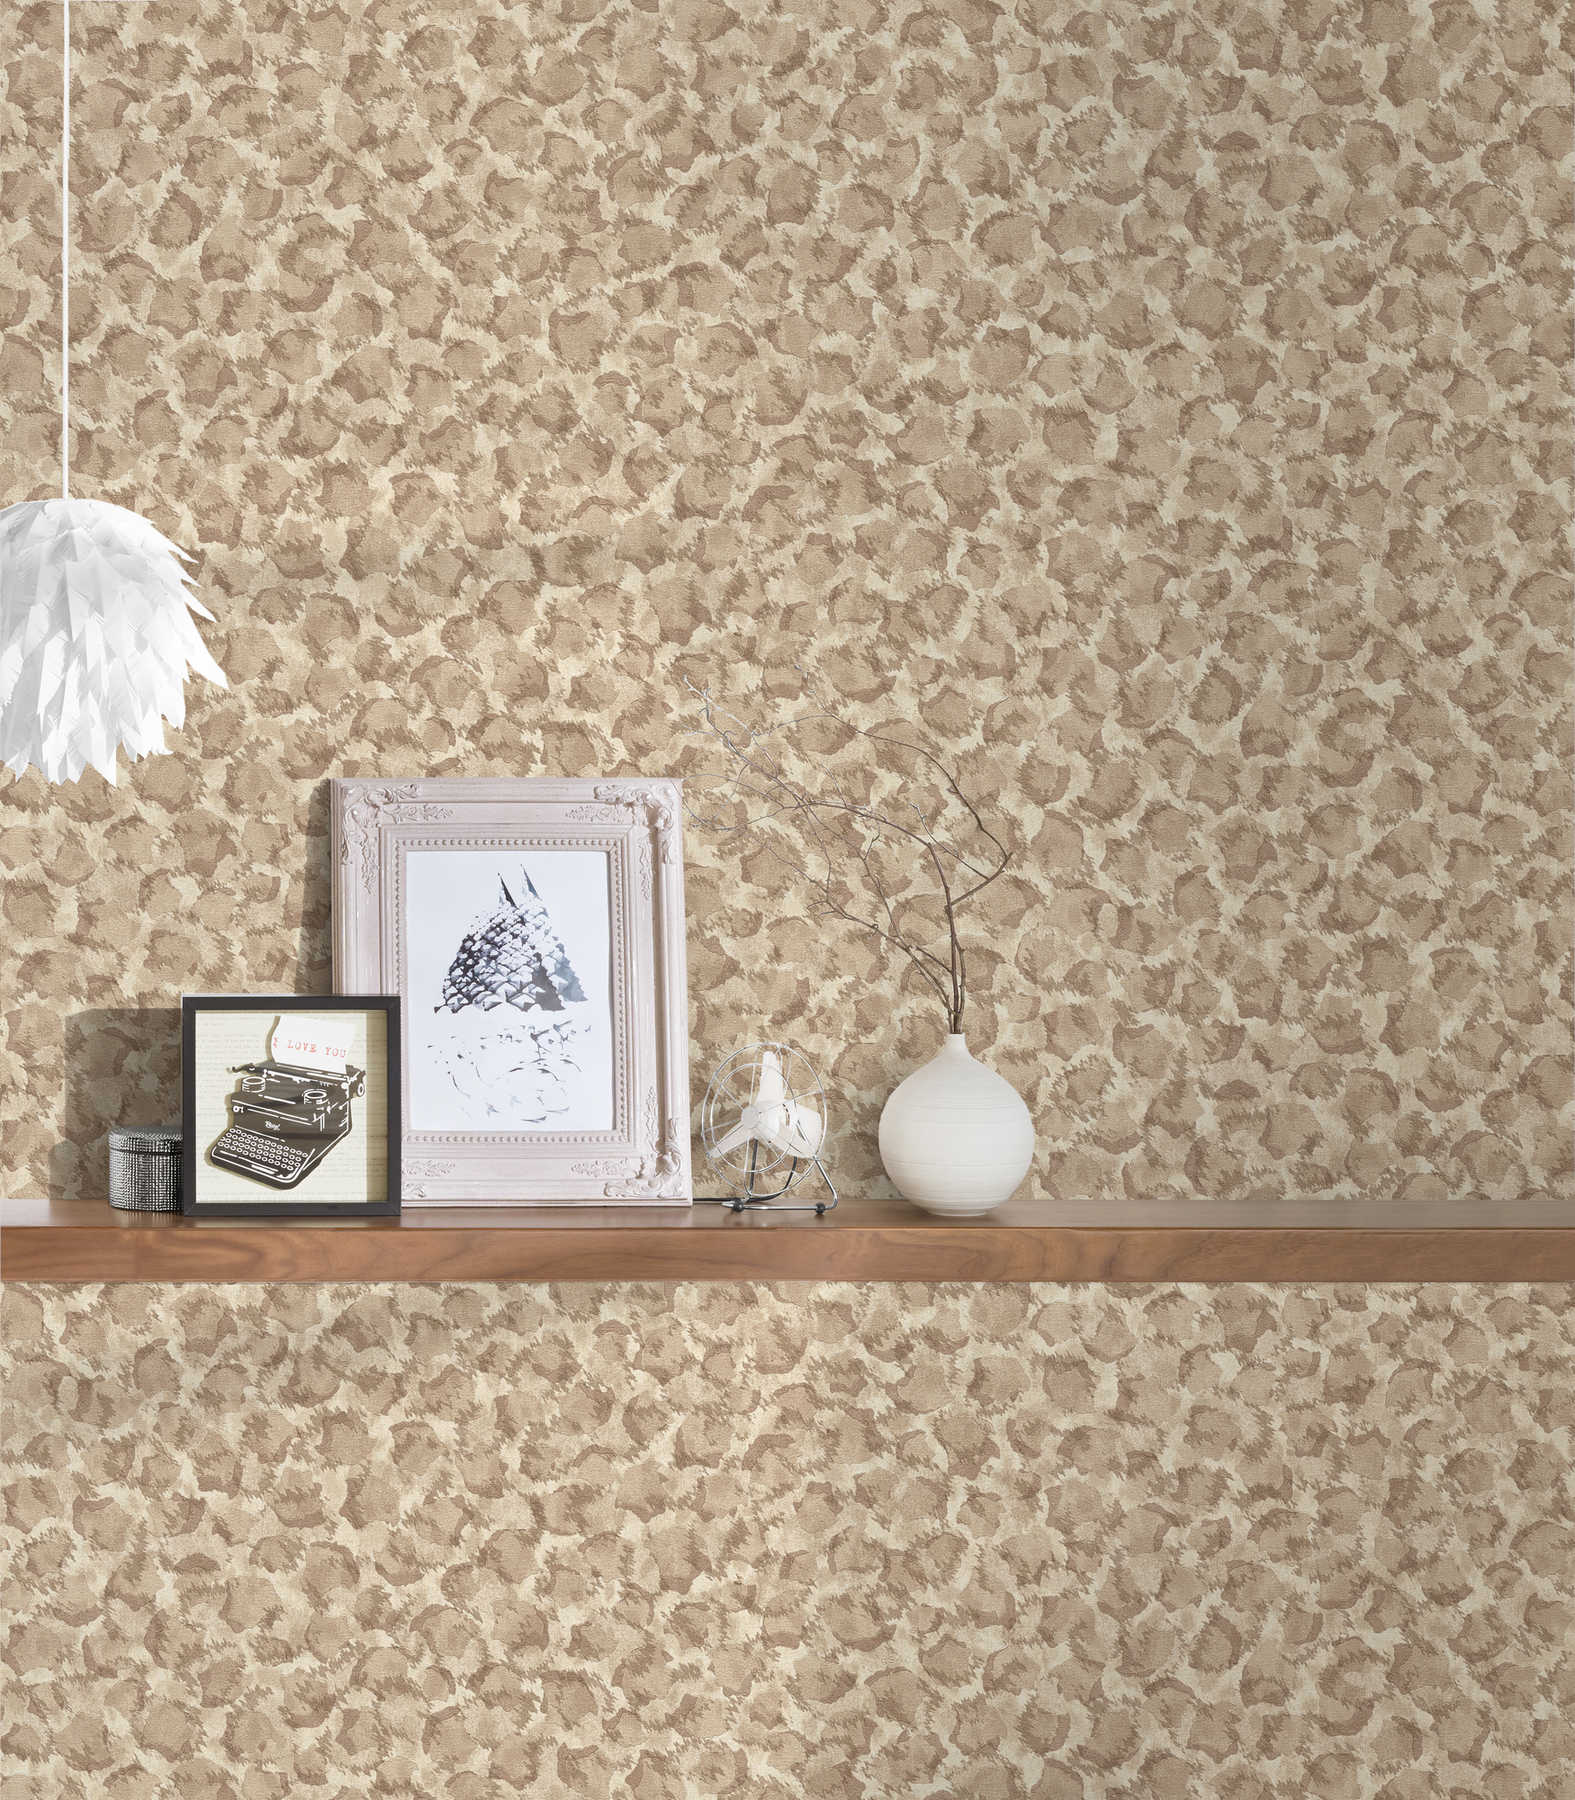             Non-woven wallpaper polka dots in earth tones in Ethnor style - beige, brown
        